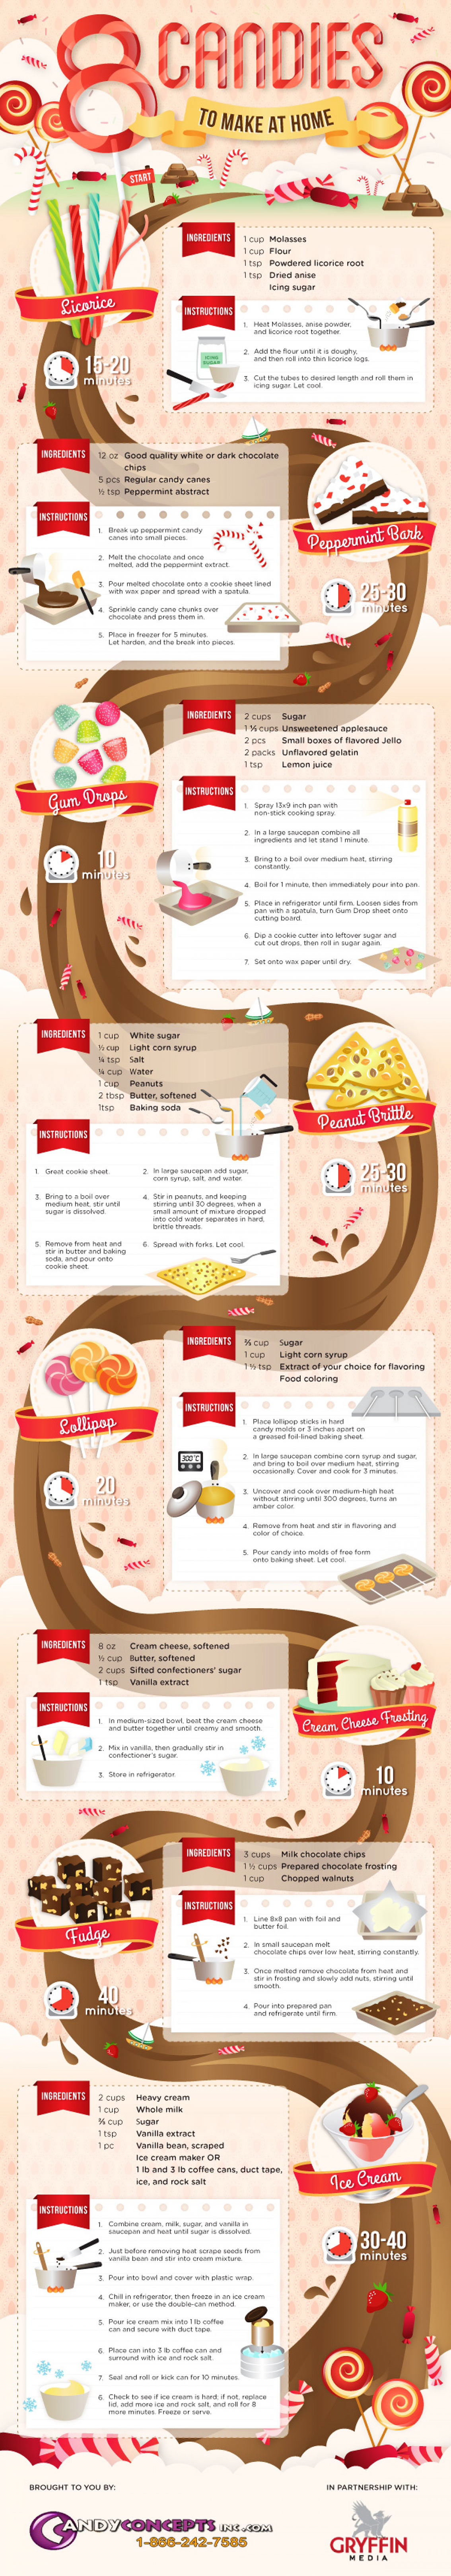 Candies to Make at Home Recipe Infographic